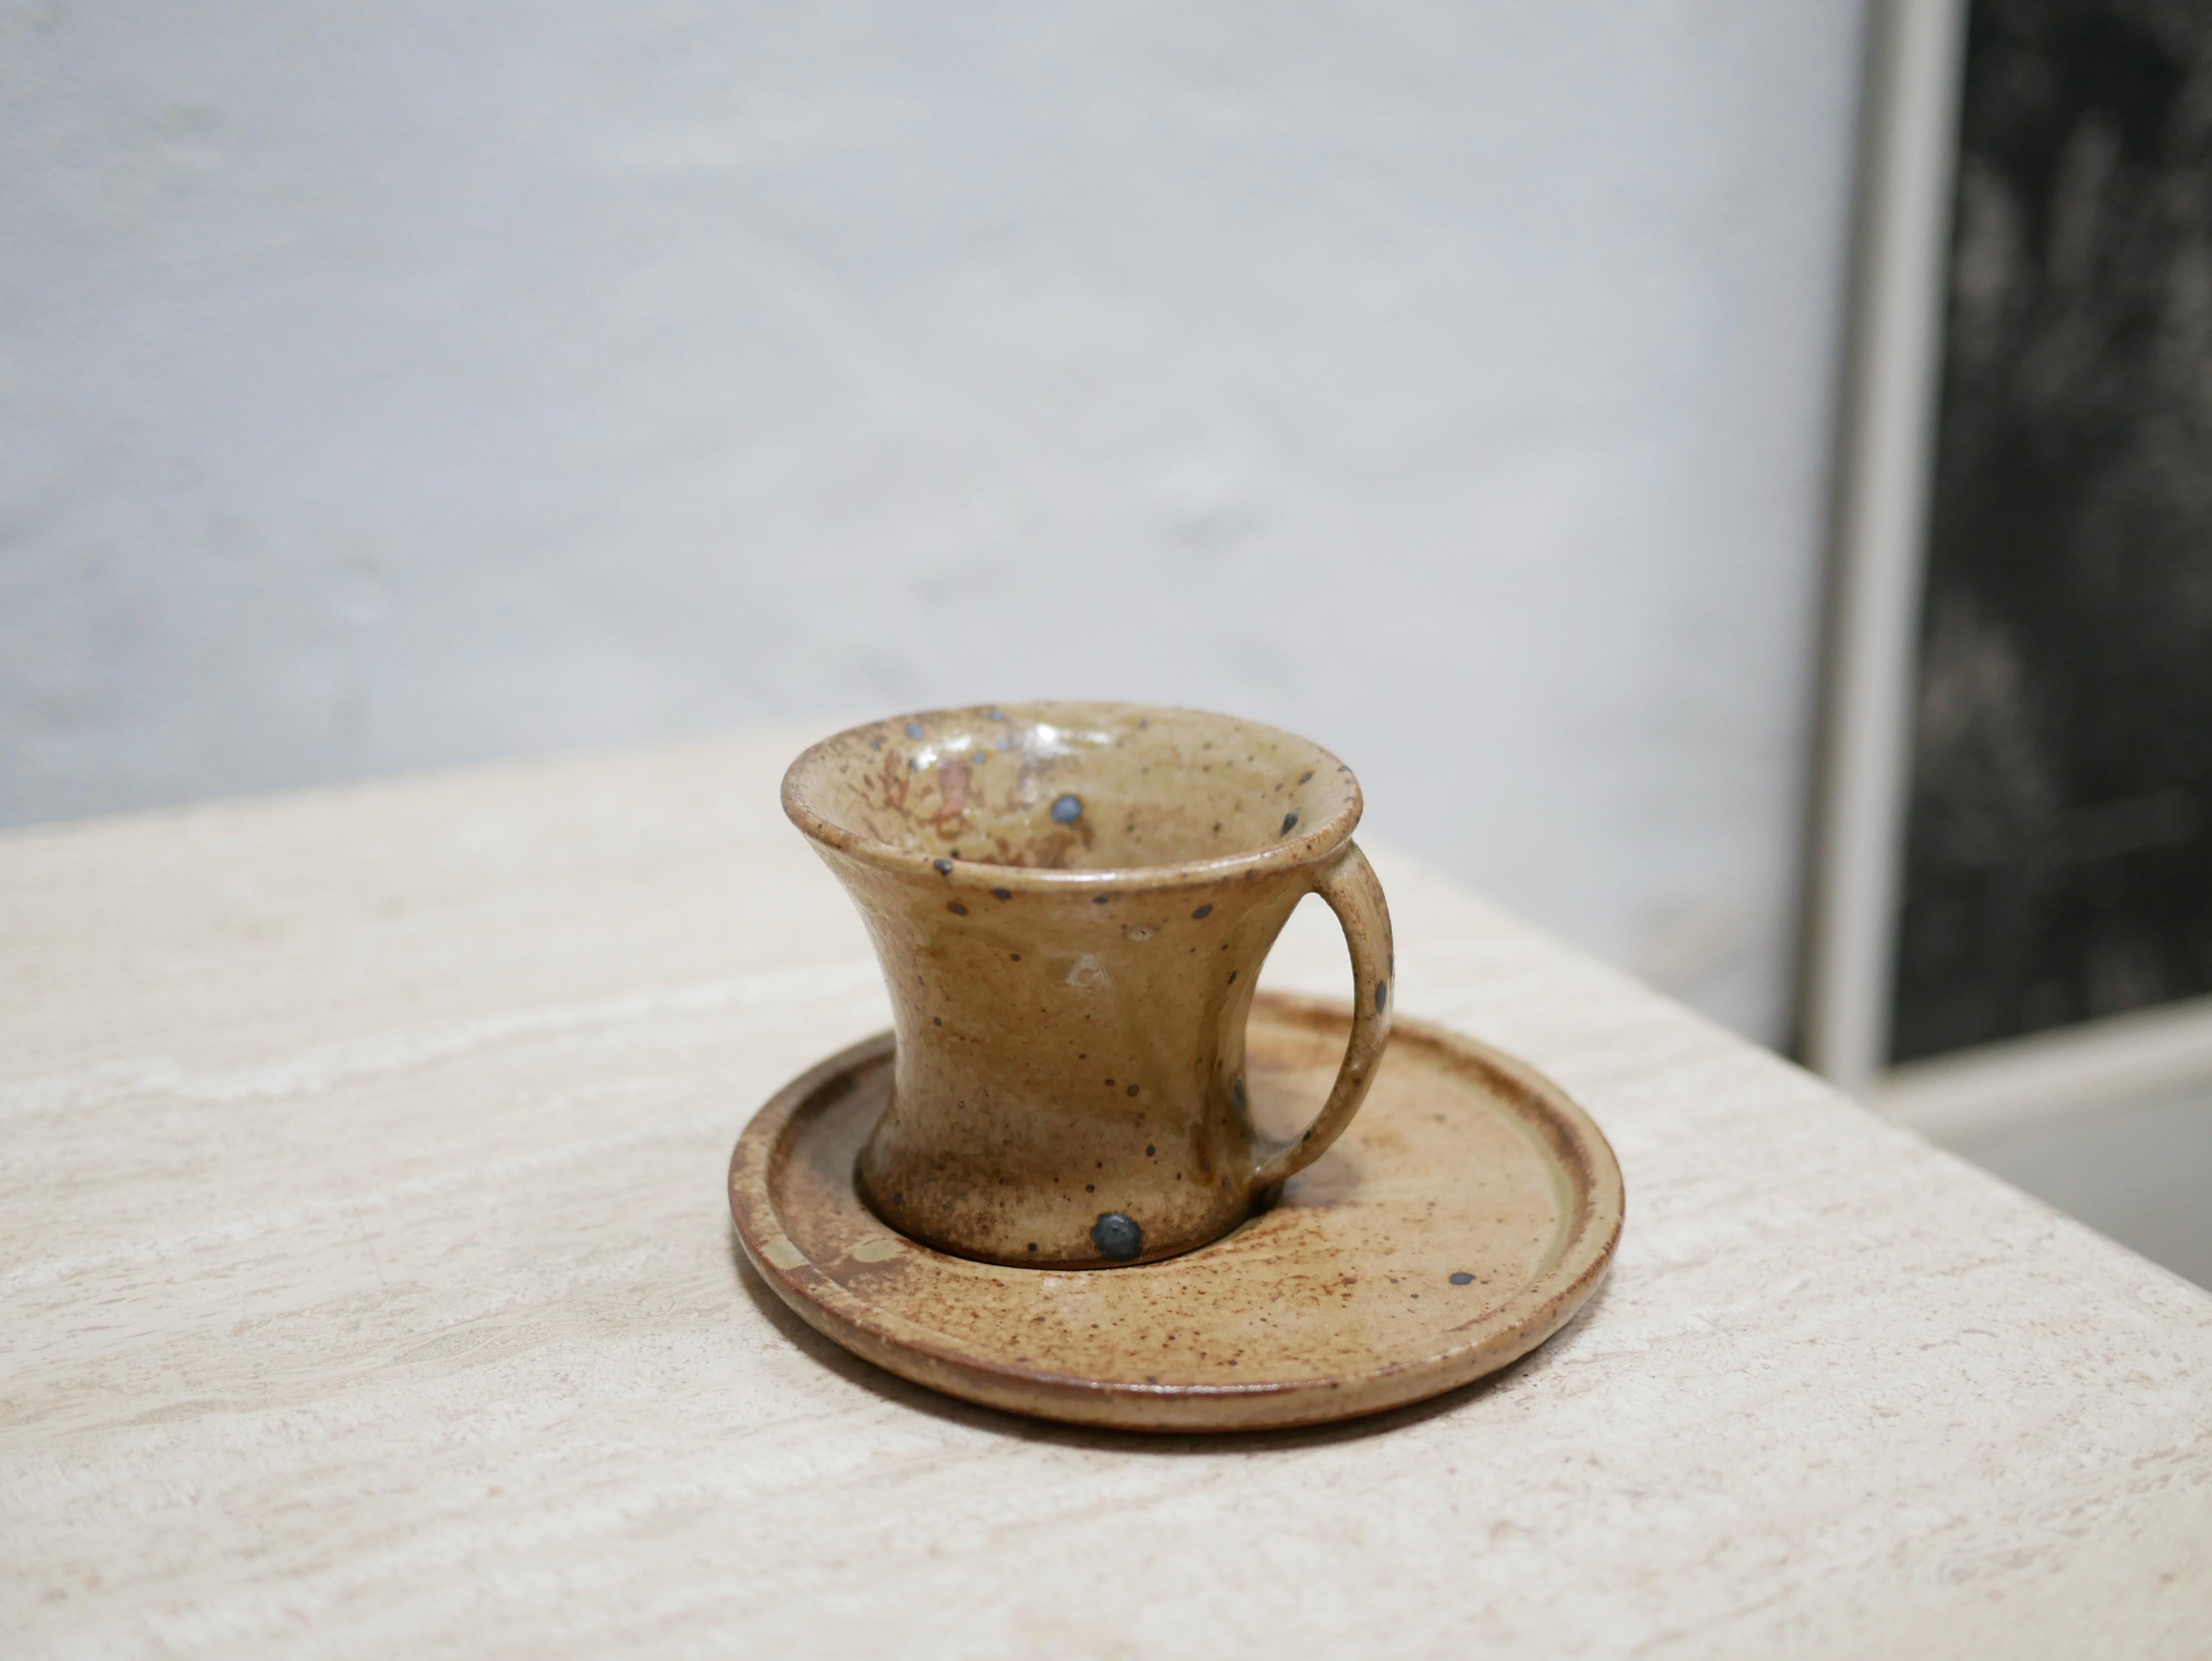 Sandstone cup and saucer from the 60s.

With its modern shape and mineral hue, the set will be perfect in a natural, refined and delicate decoration.

Very good condition.

Dimensions:

Cup: Height 6.5cm x Diameter 8.5cm
Saucer: Height